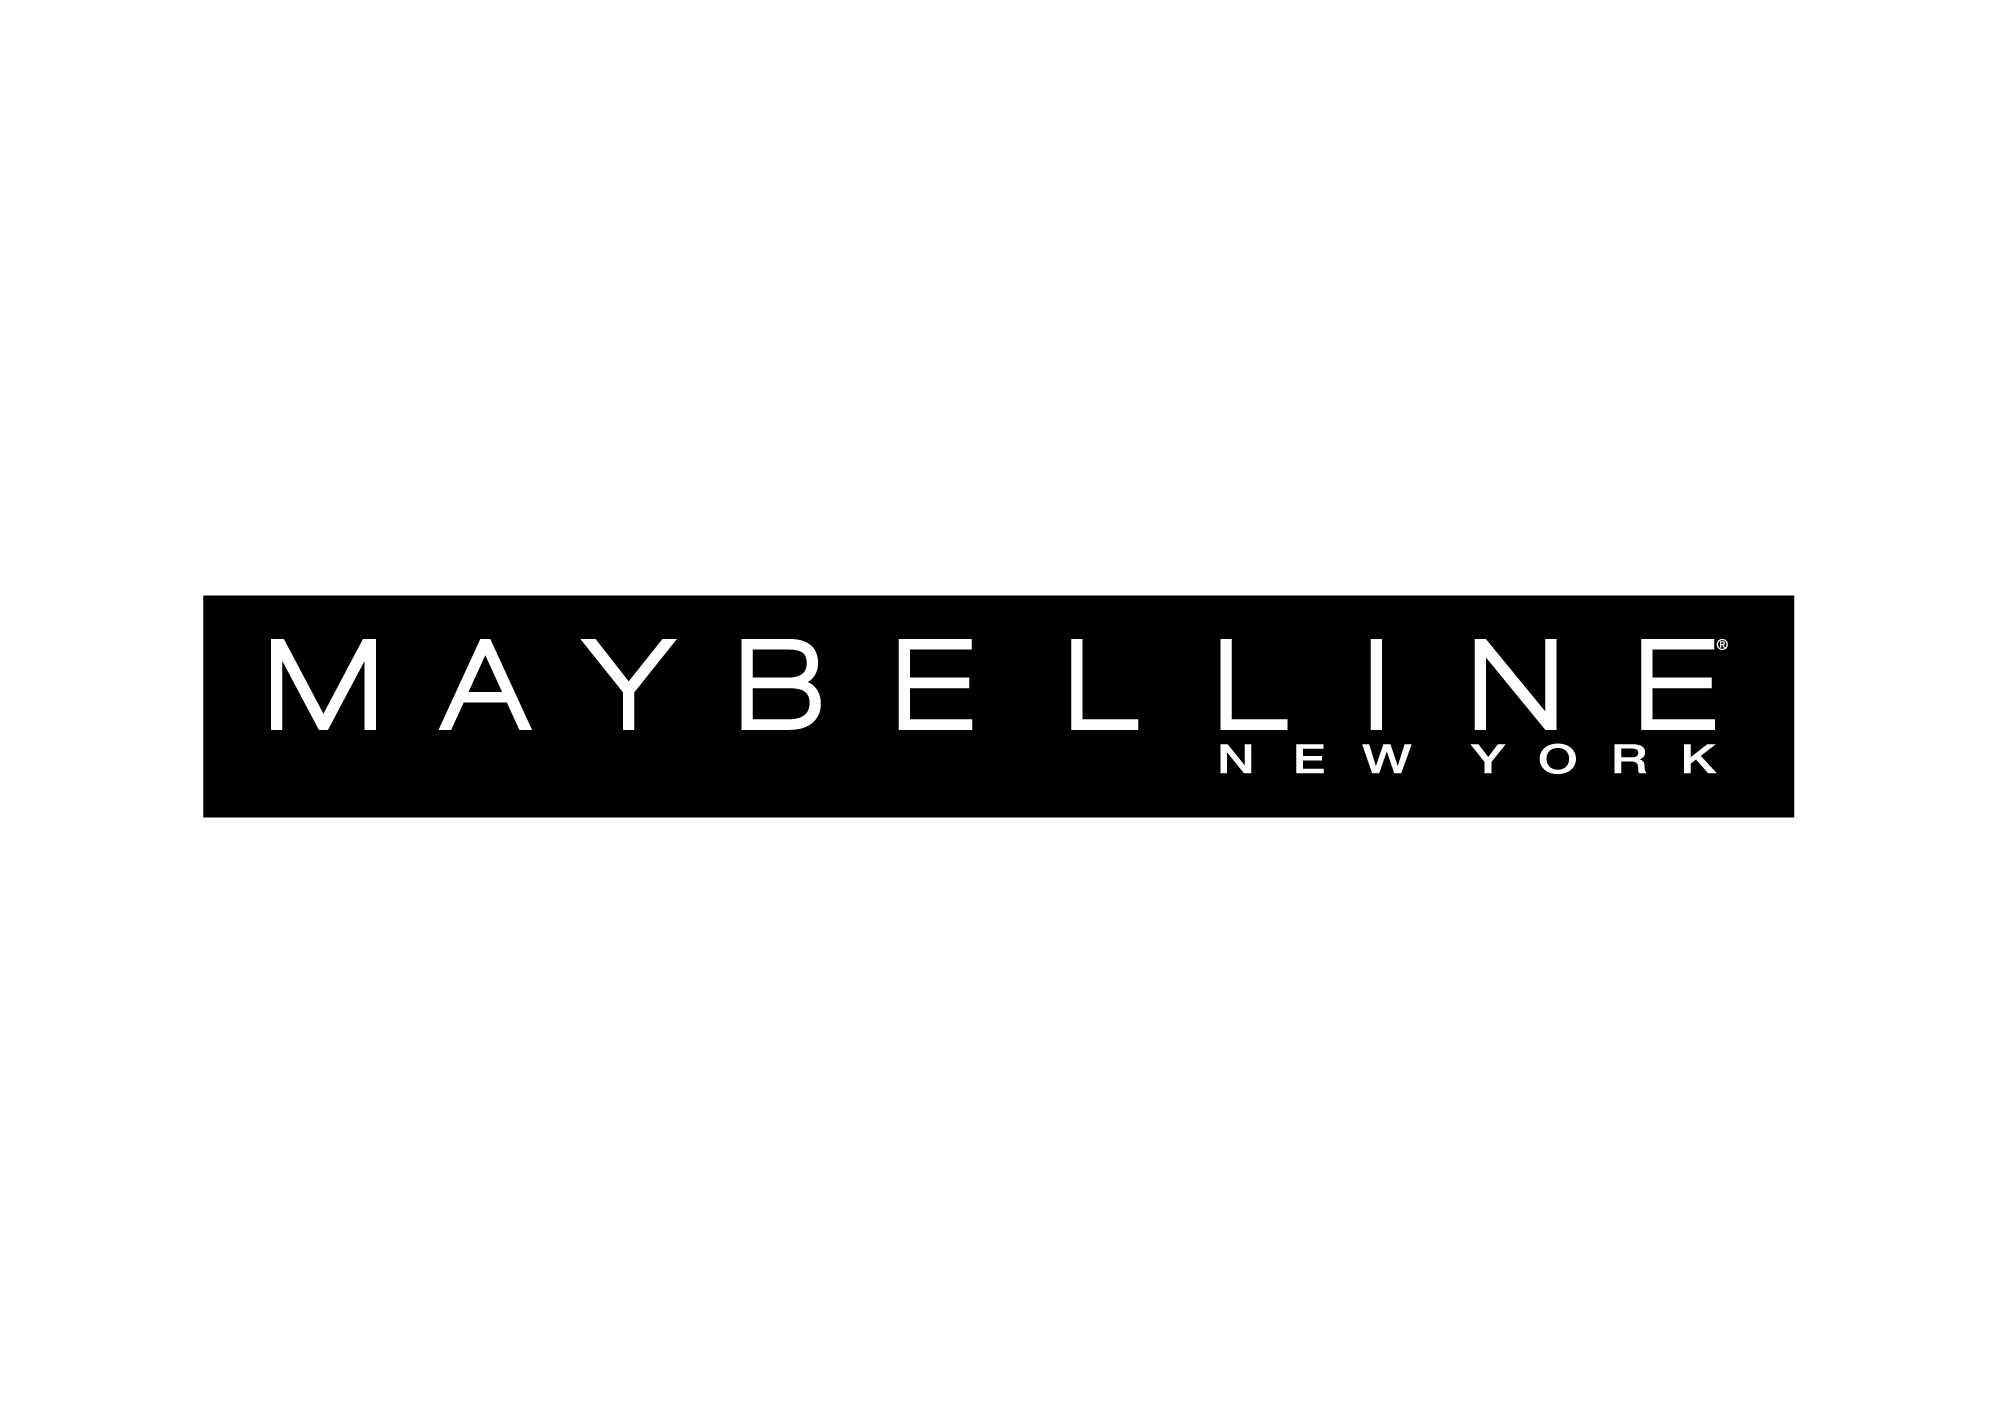 Maybelline Company Logo - Pin by Alexandra Gheorghe on Logo in 2019 | Maybelline, Logos, Branding